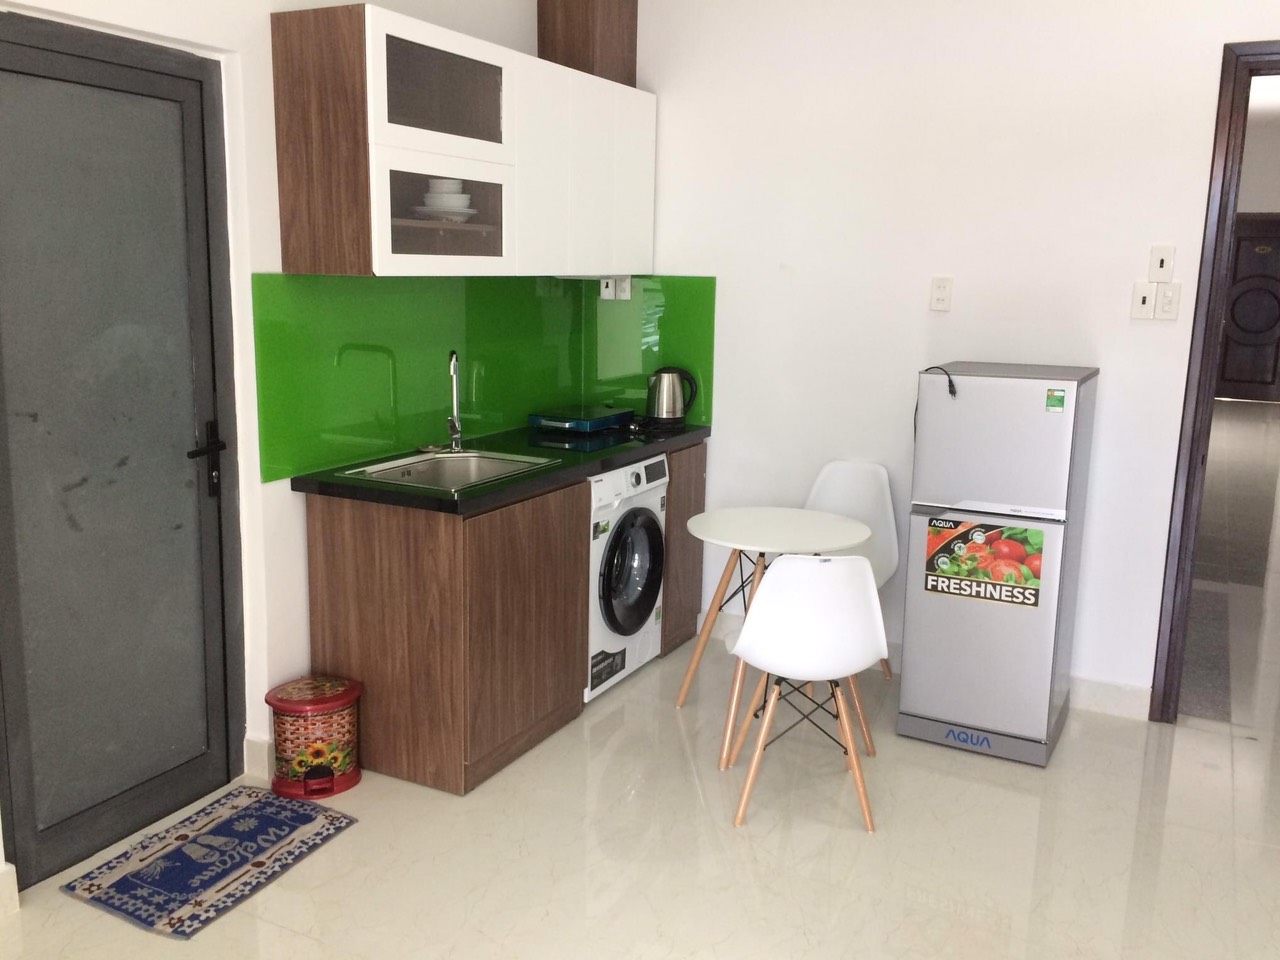 Apartment building for rent in the center of Nha Trang city.